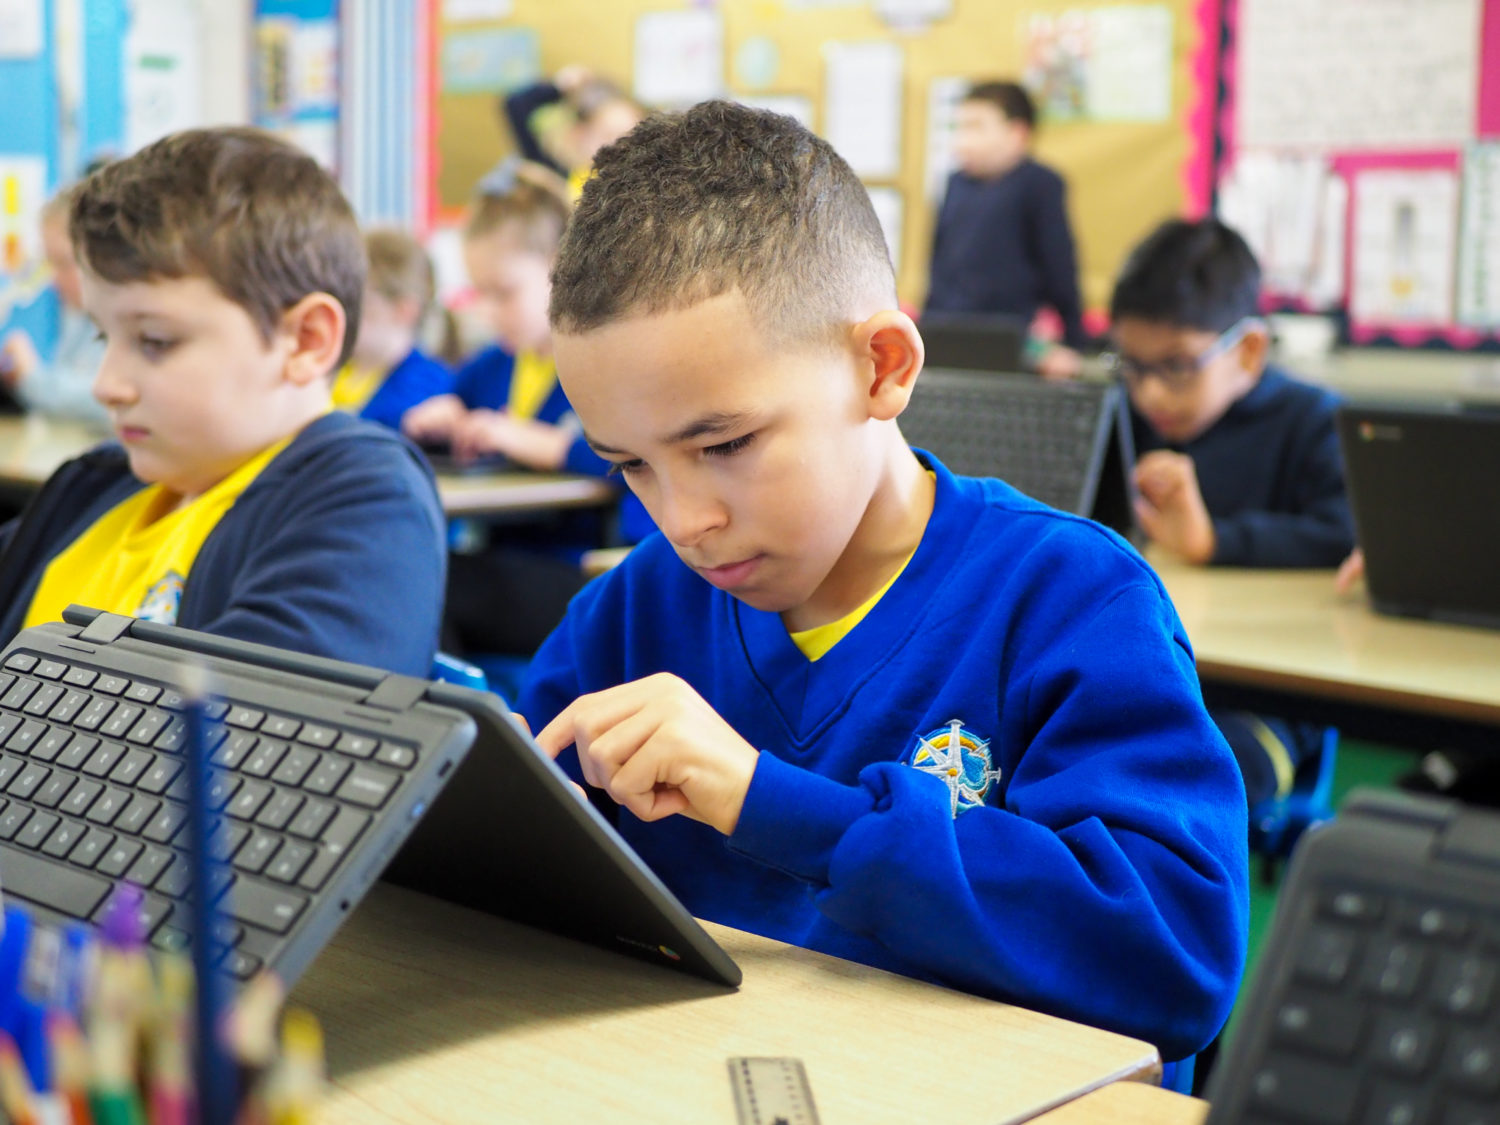 A young boy is seen sat at his desk using a tablet computer in a classroom.